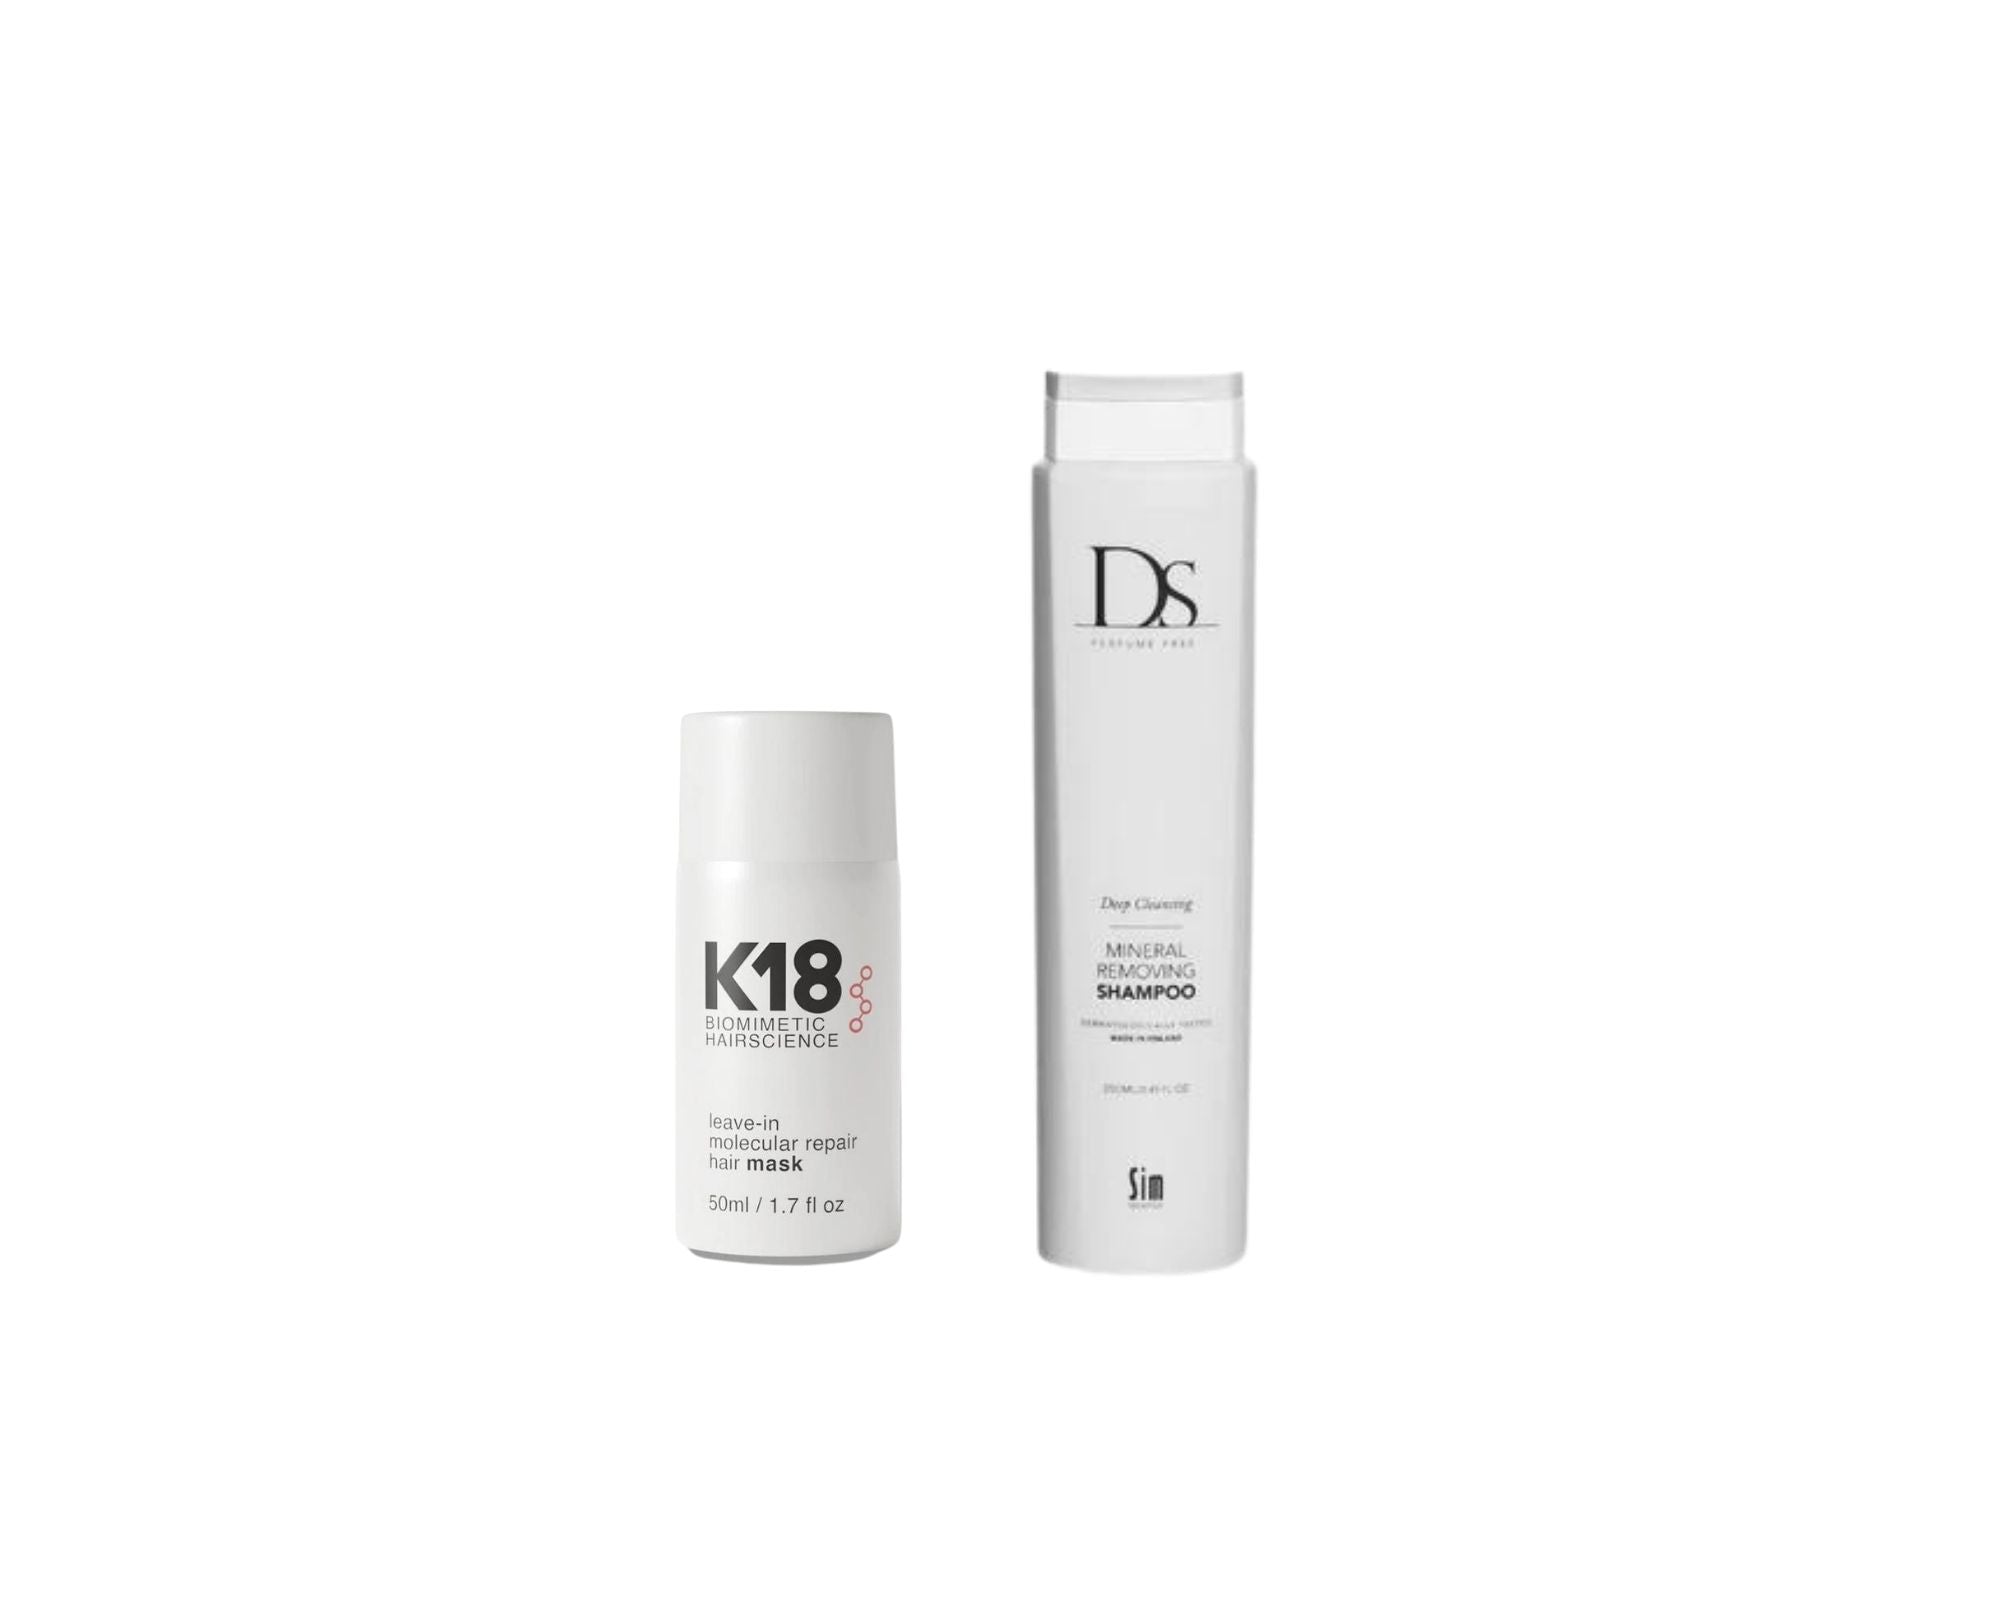 K18 Hair Mask 50ml + Ds Mineral removing shampoo 250ml